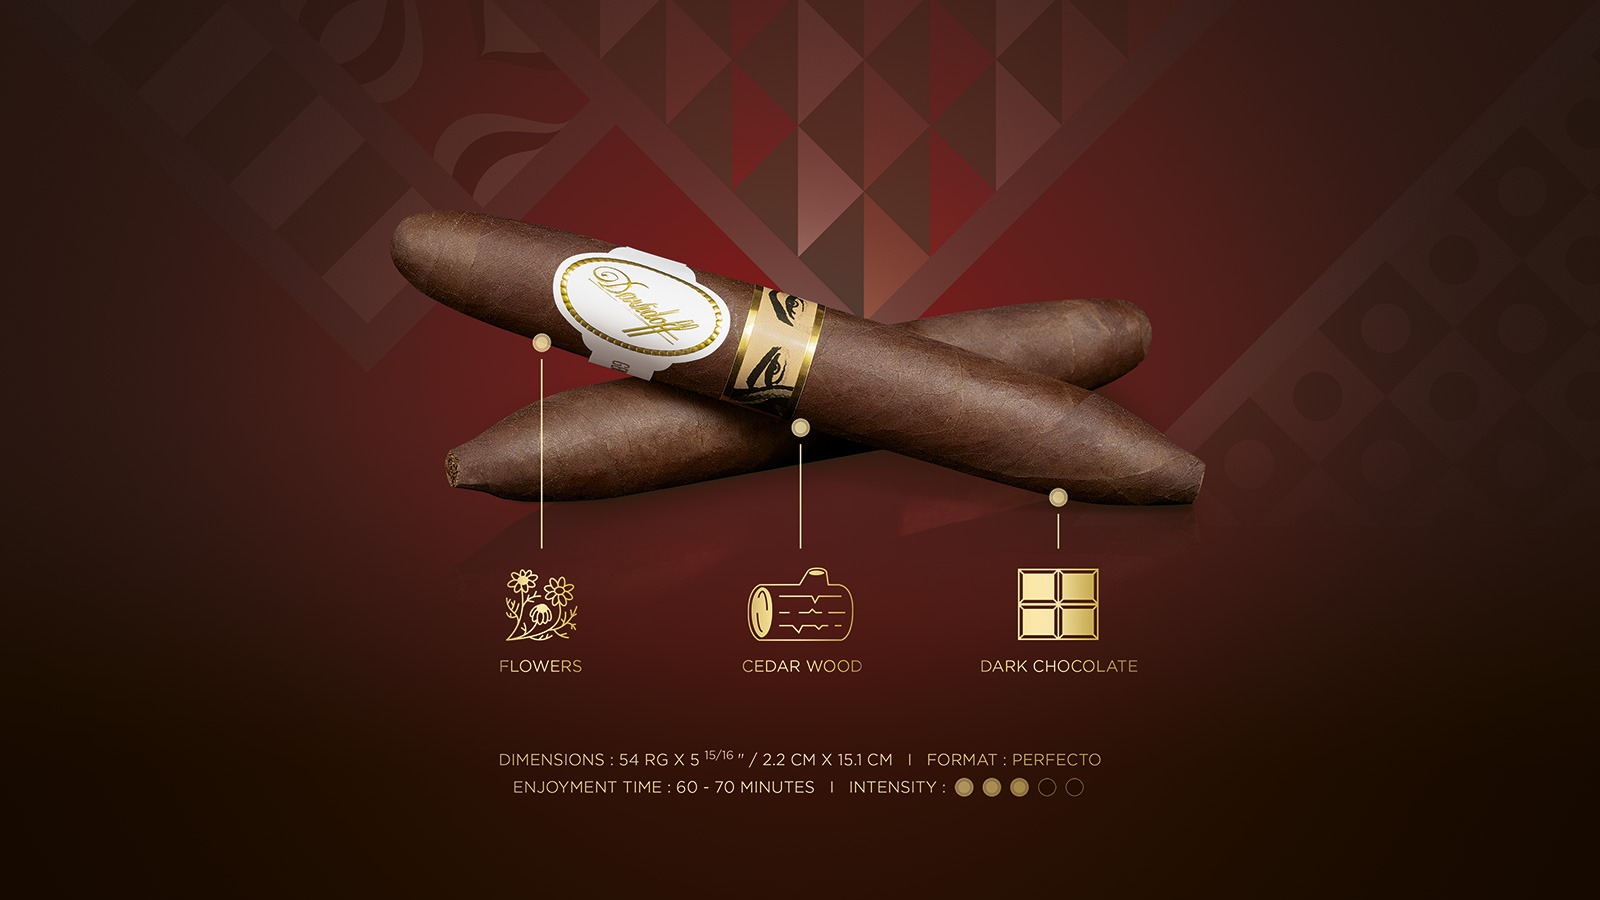 Two perfecto cigars which come with the Davidoff & Boyarde Masterpiece Humidor The Direct Gaze with blend details displayed, such as main aromas, enjoyment time and intensity.